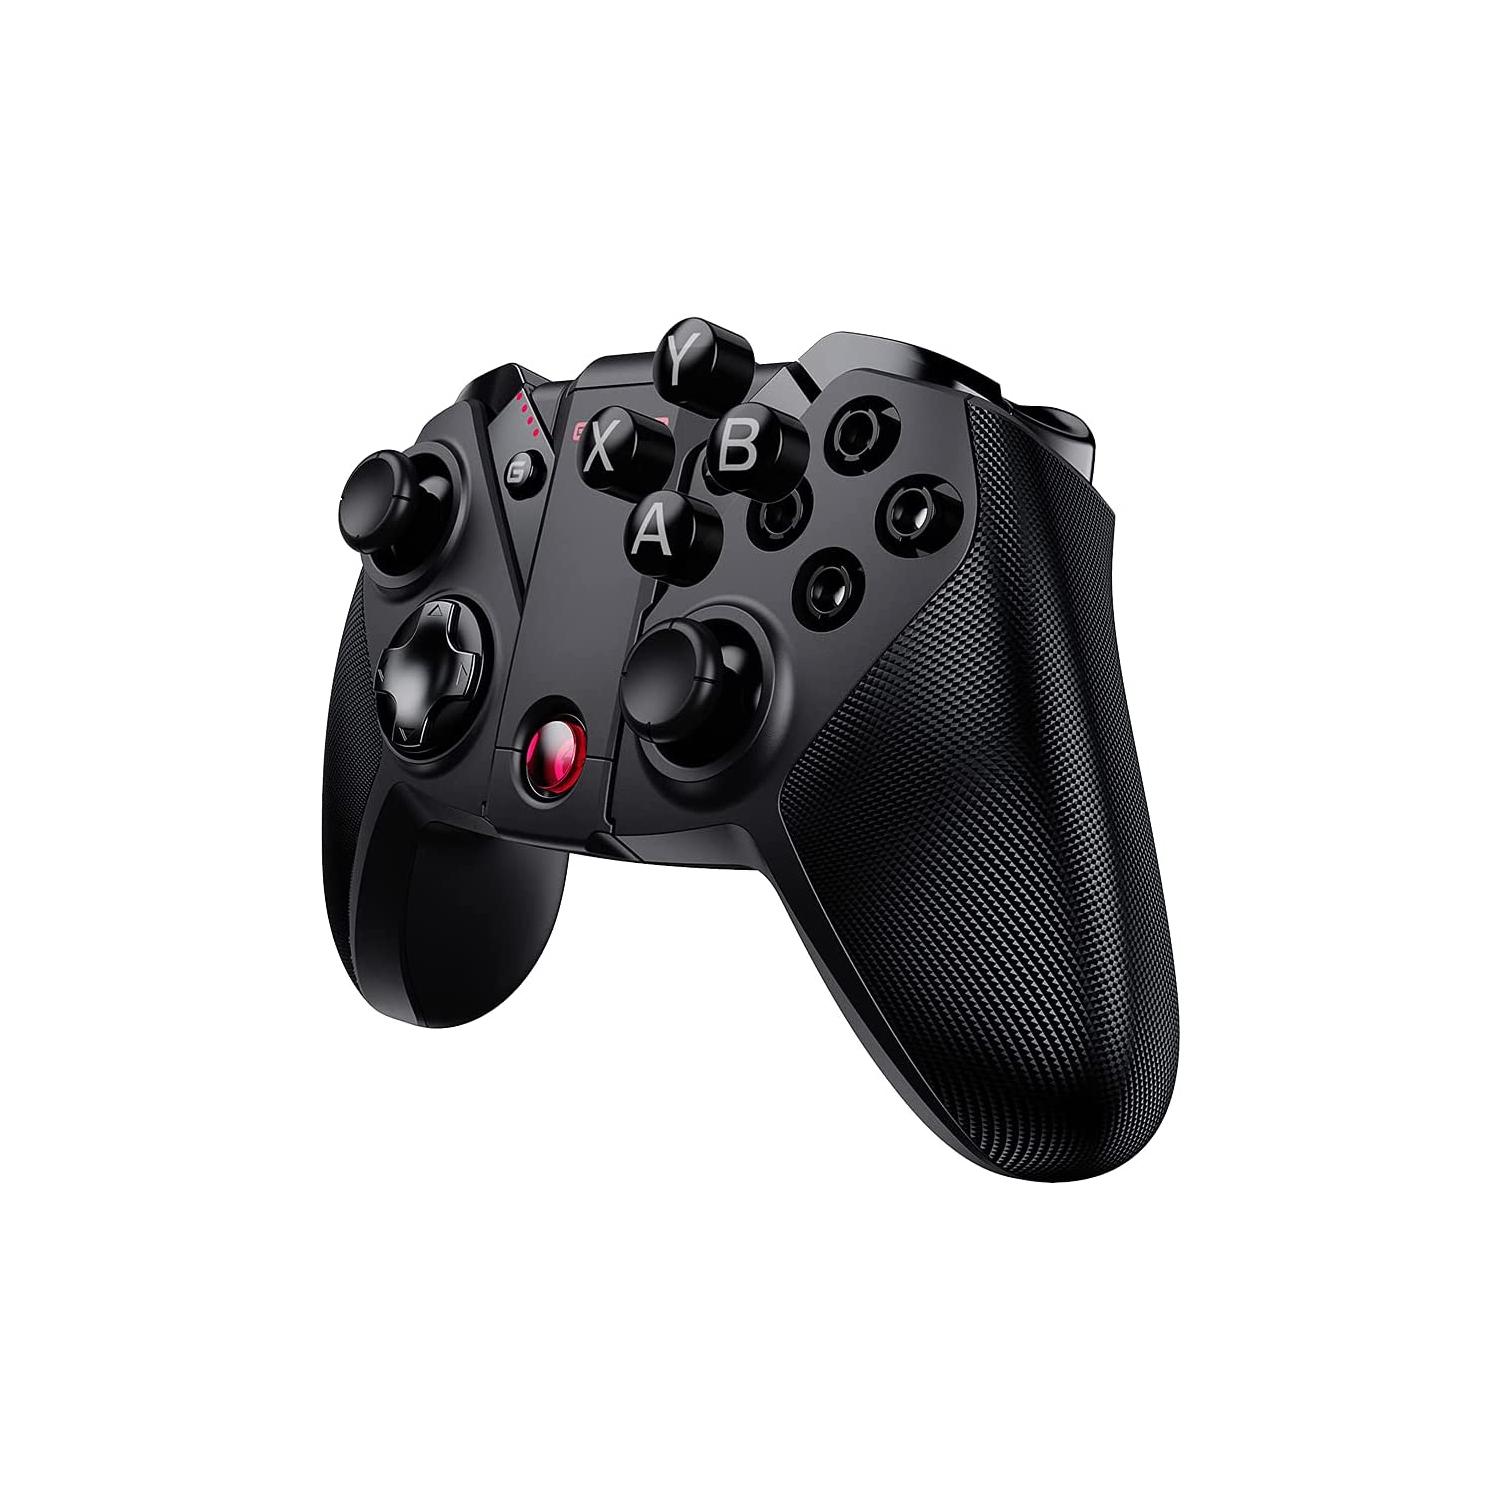 GameSir G4 Pro Bluetooth Wireless Gaming Controller for Android/ iOS/ PC/ Nintendo Switch with Phone Bracket - Open Box